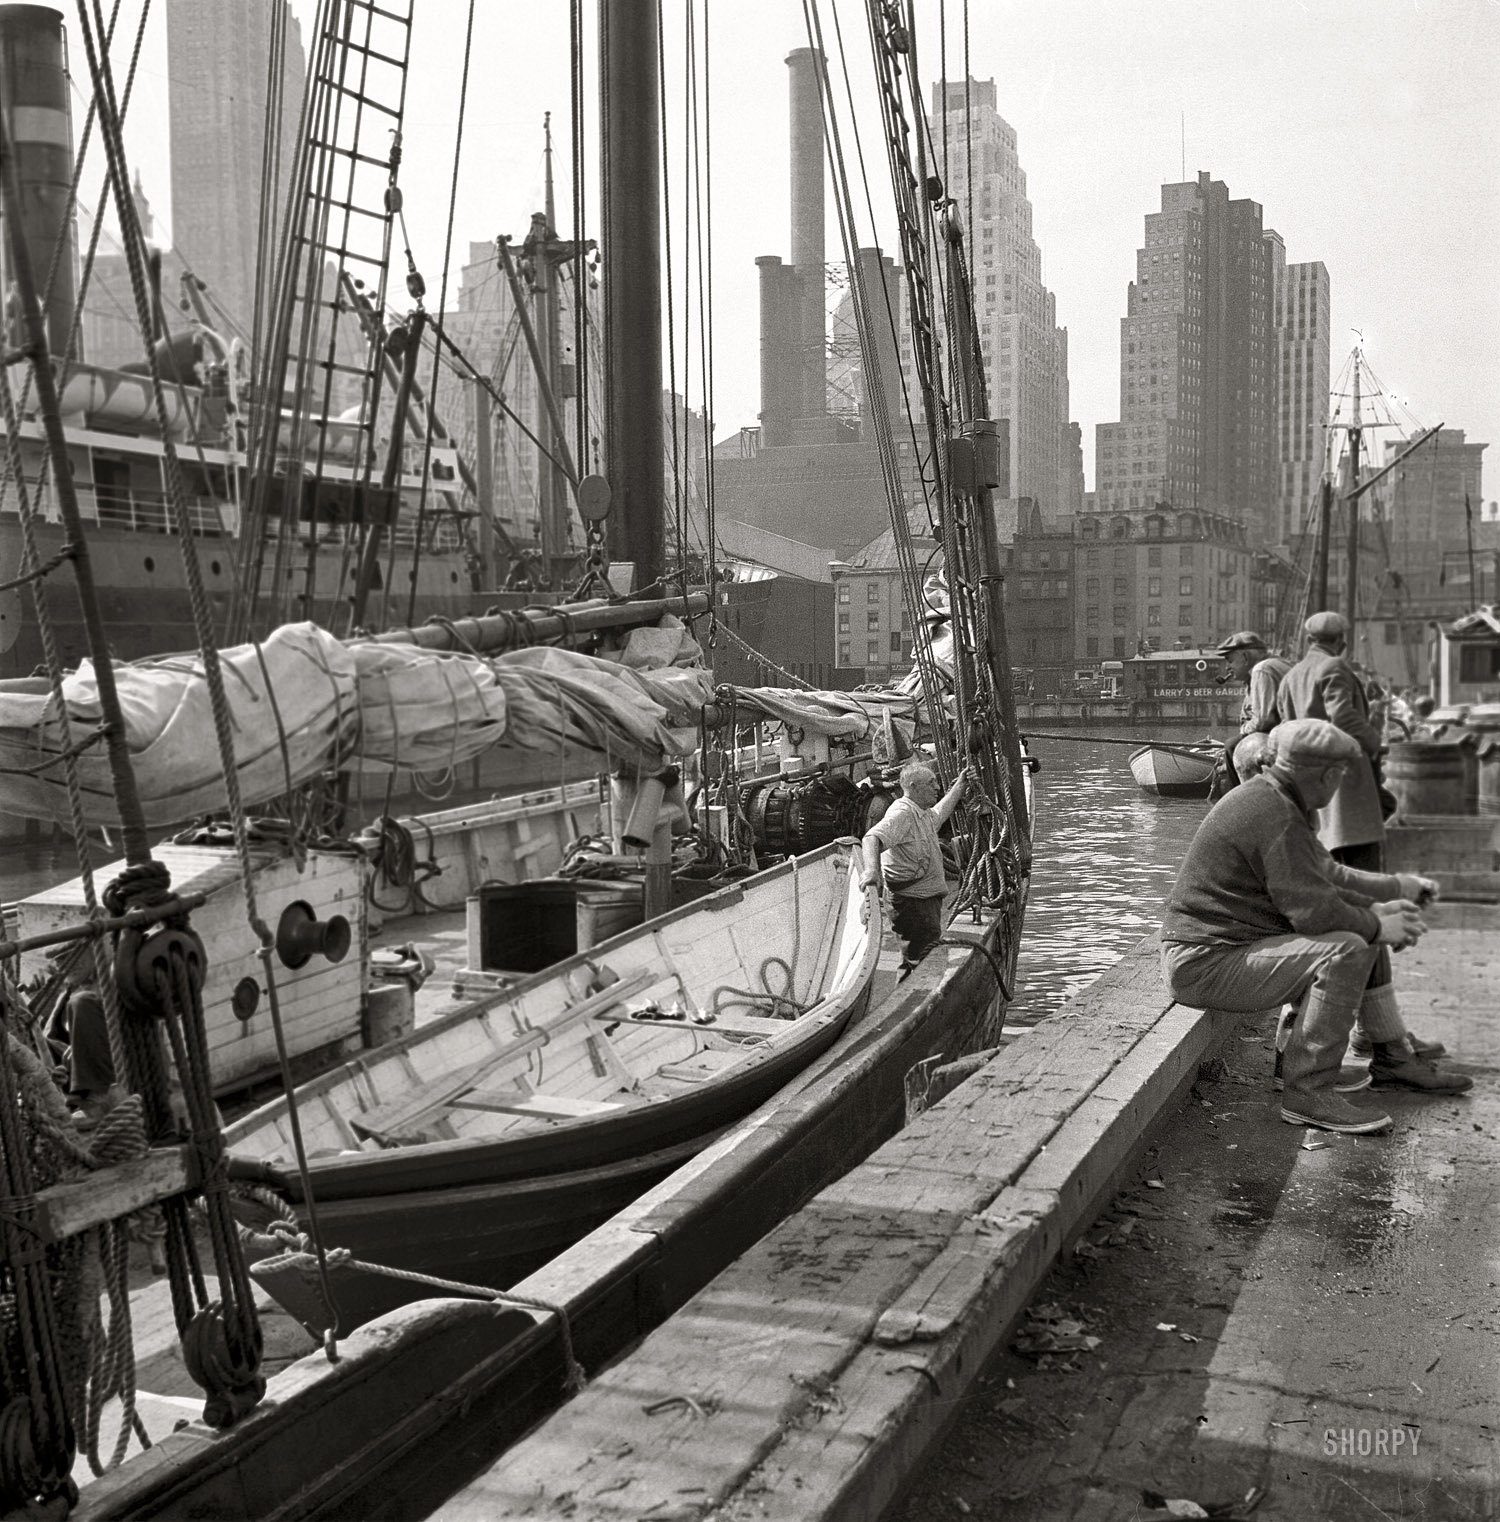 April 20, 1934. "New York. Fulton Market pier, view to Manhattan over East River." 4x5 inch nitrate negative by Gottscho-Schleisner. View full size.